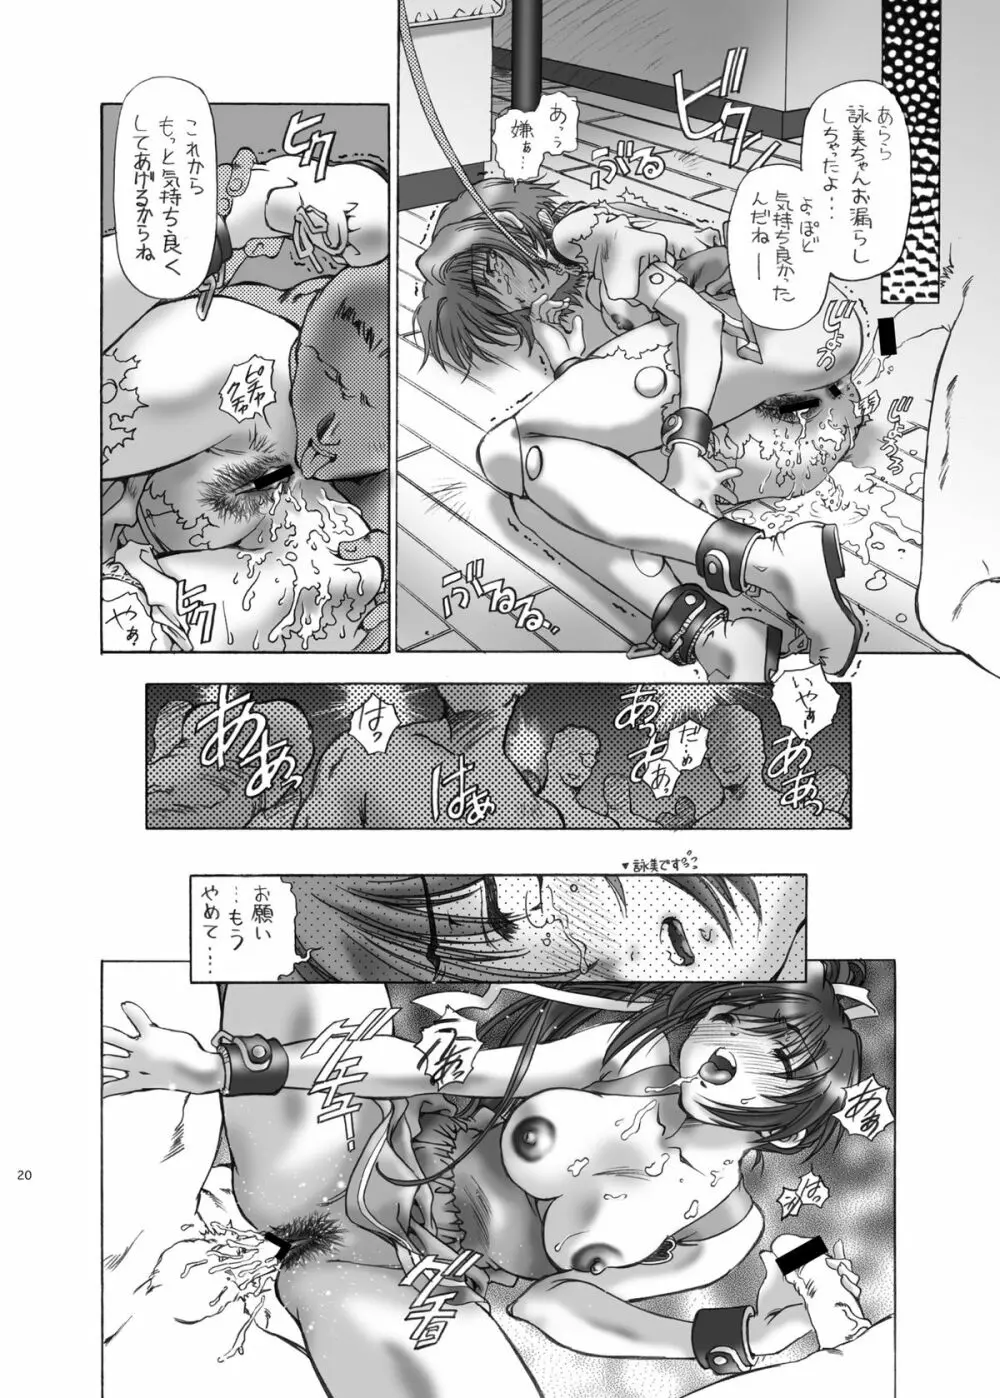 SWEET ANGEL SELECTION 3DL - page19